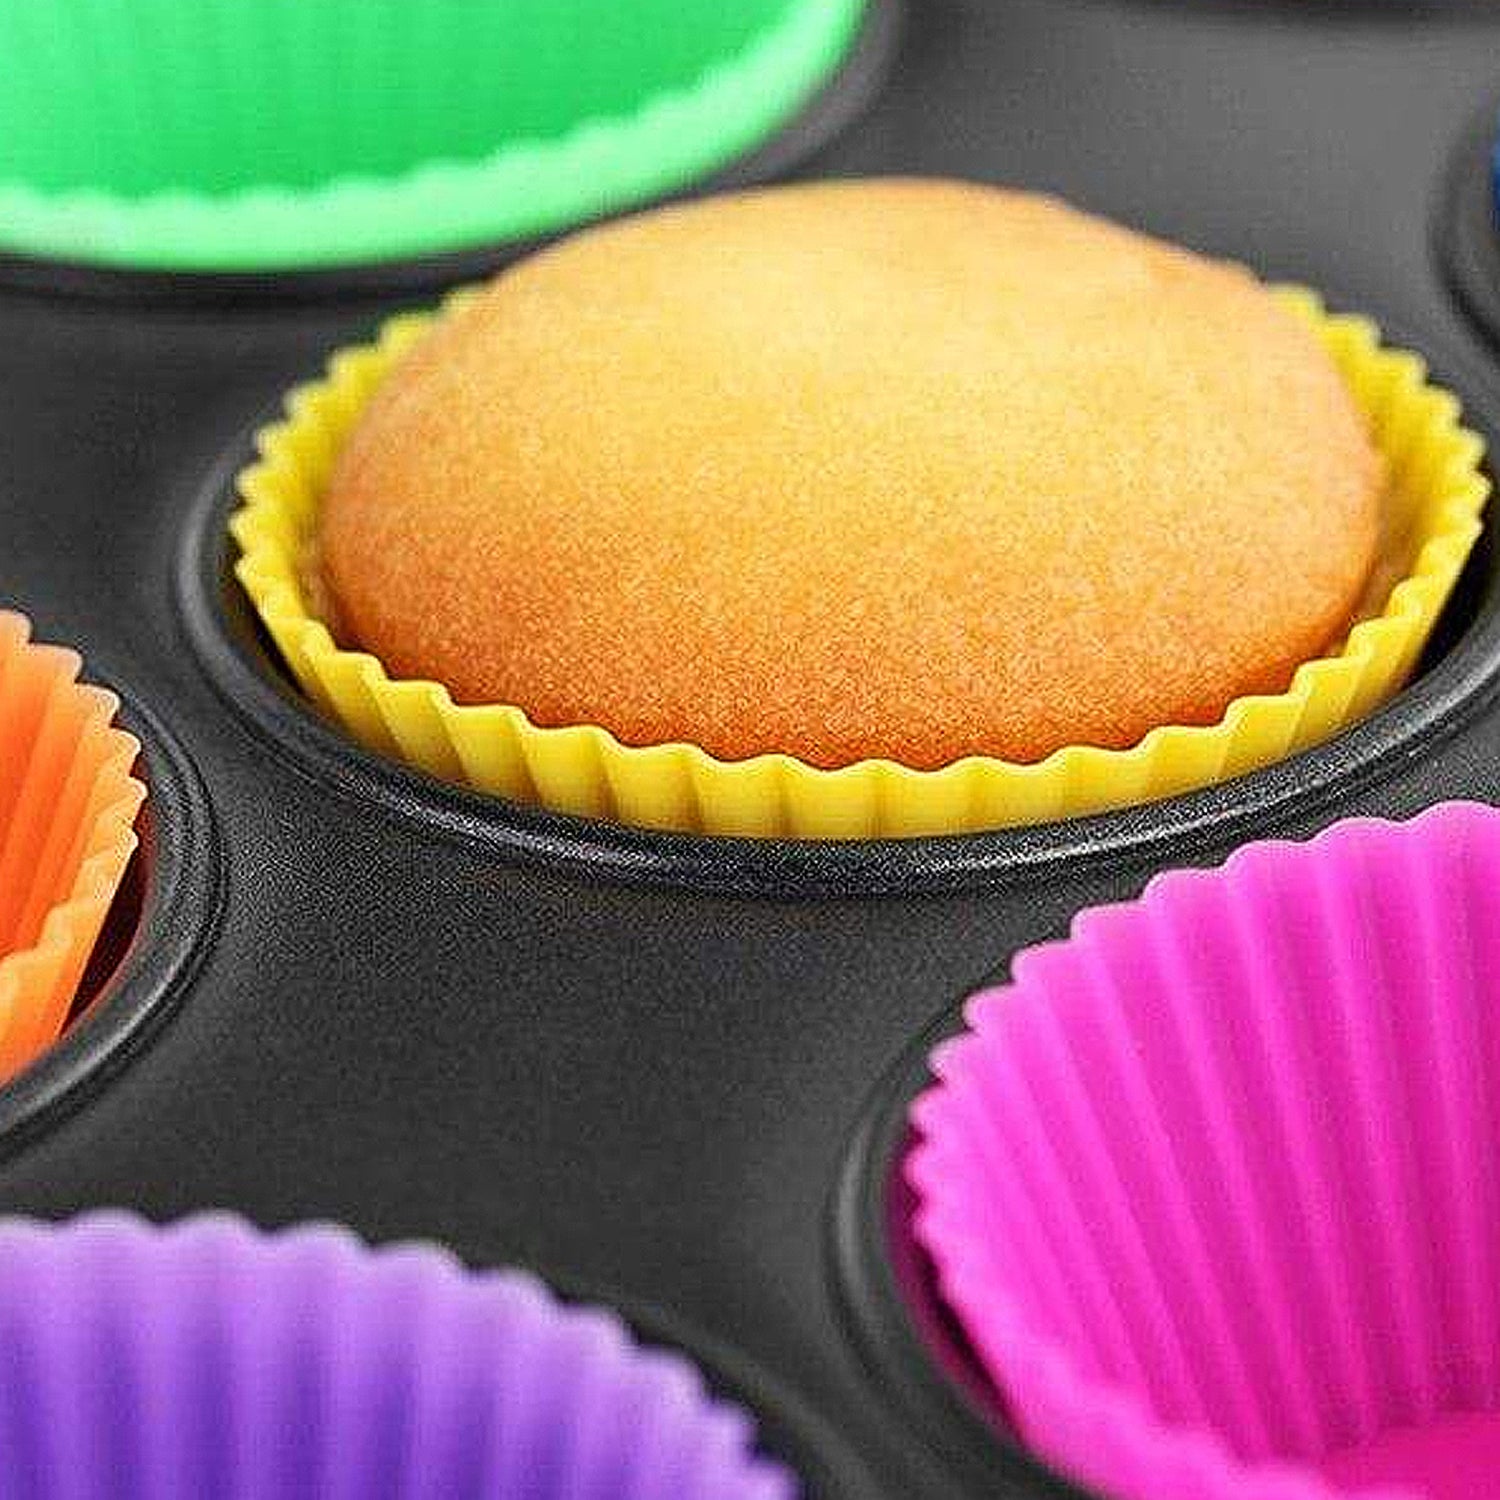 24-Pack: Multicolored Reusable Silicone Baking Cups Liner  for Cupcakes and Muffins